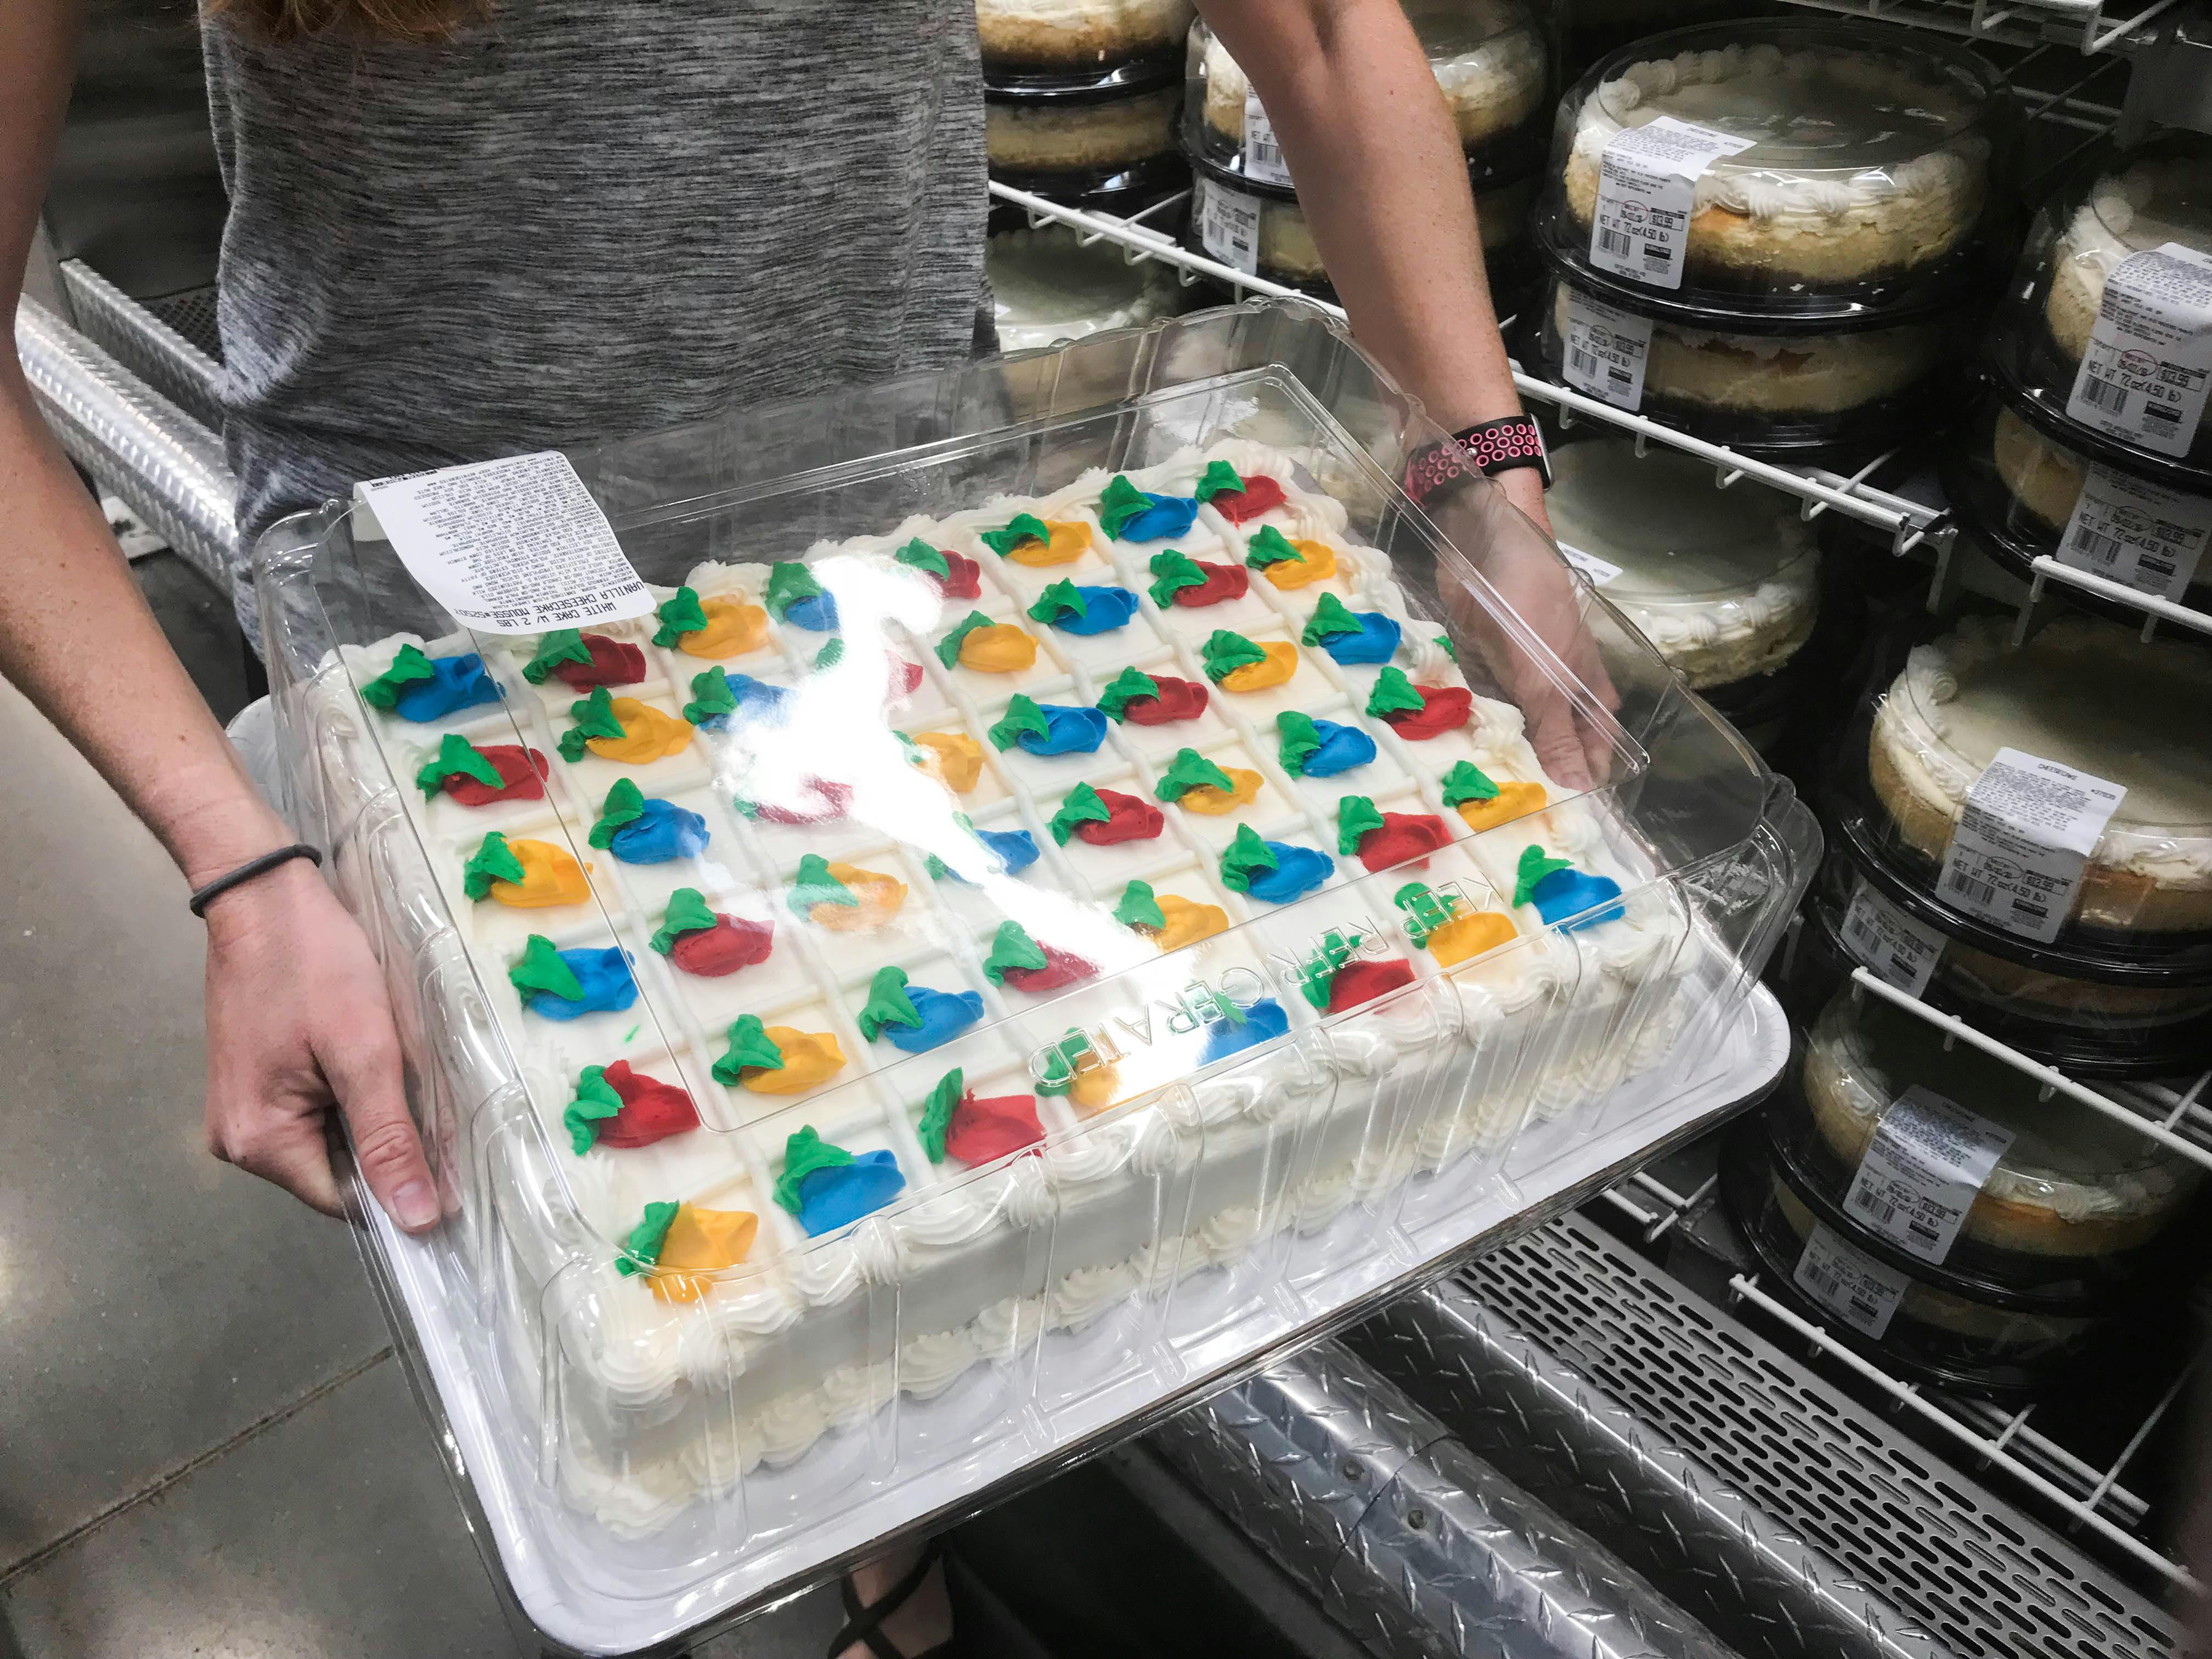 COSTCO CAKES - Watch This Before Buying (Costco Food Review) - YouTube